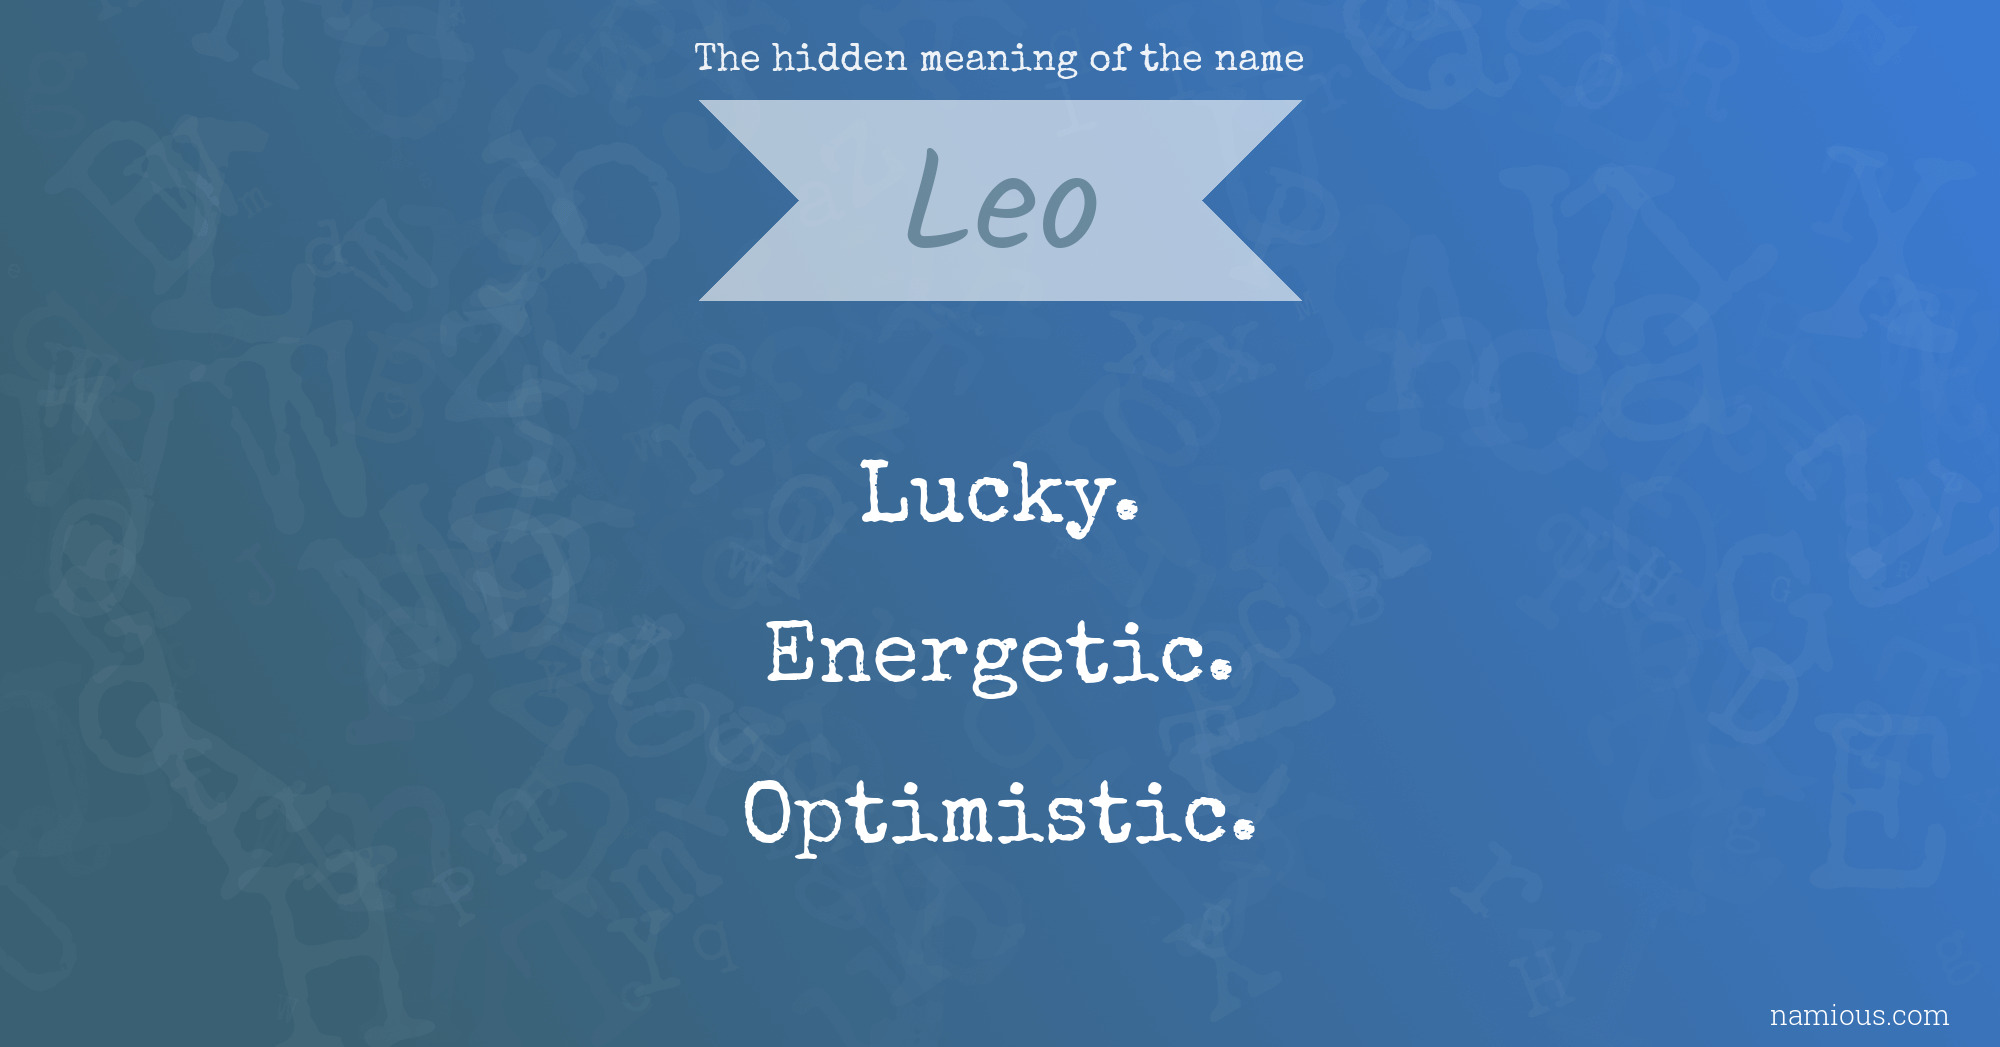 The hidden meaning of the name Leo